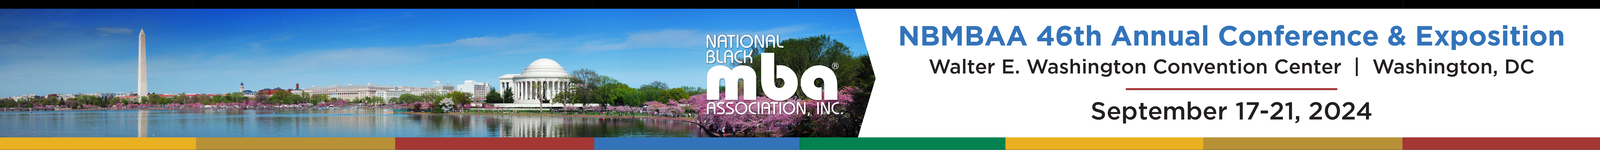 NBMBAA 46th Annual Conference and Expo logo